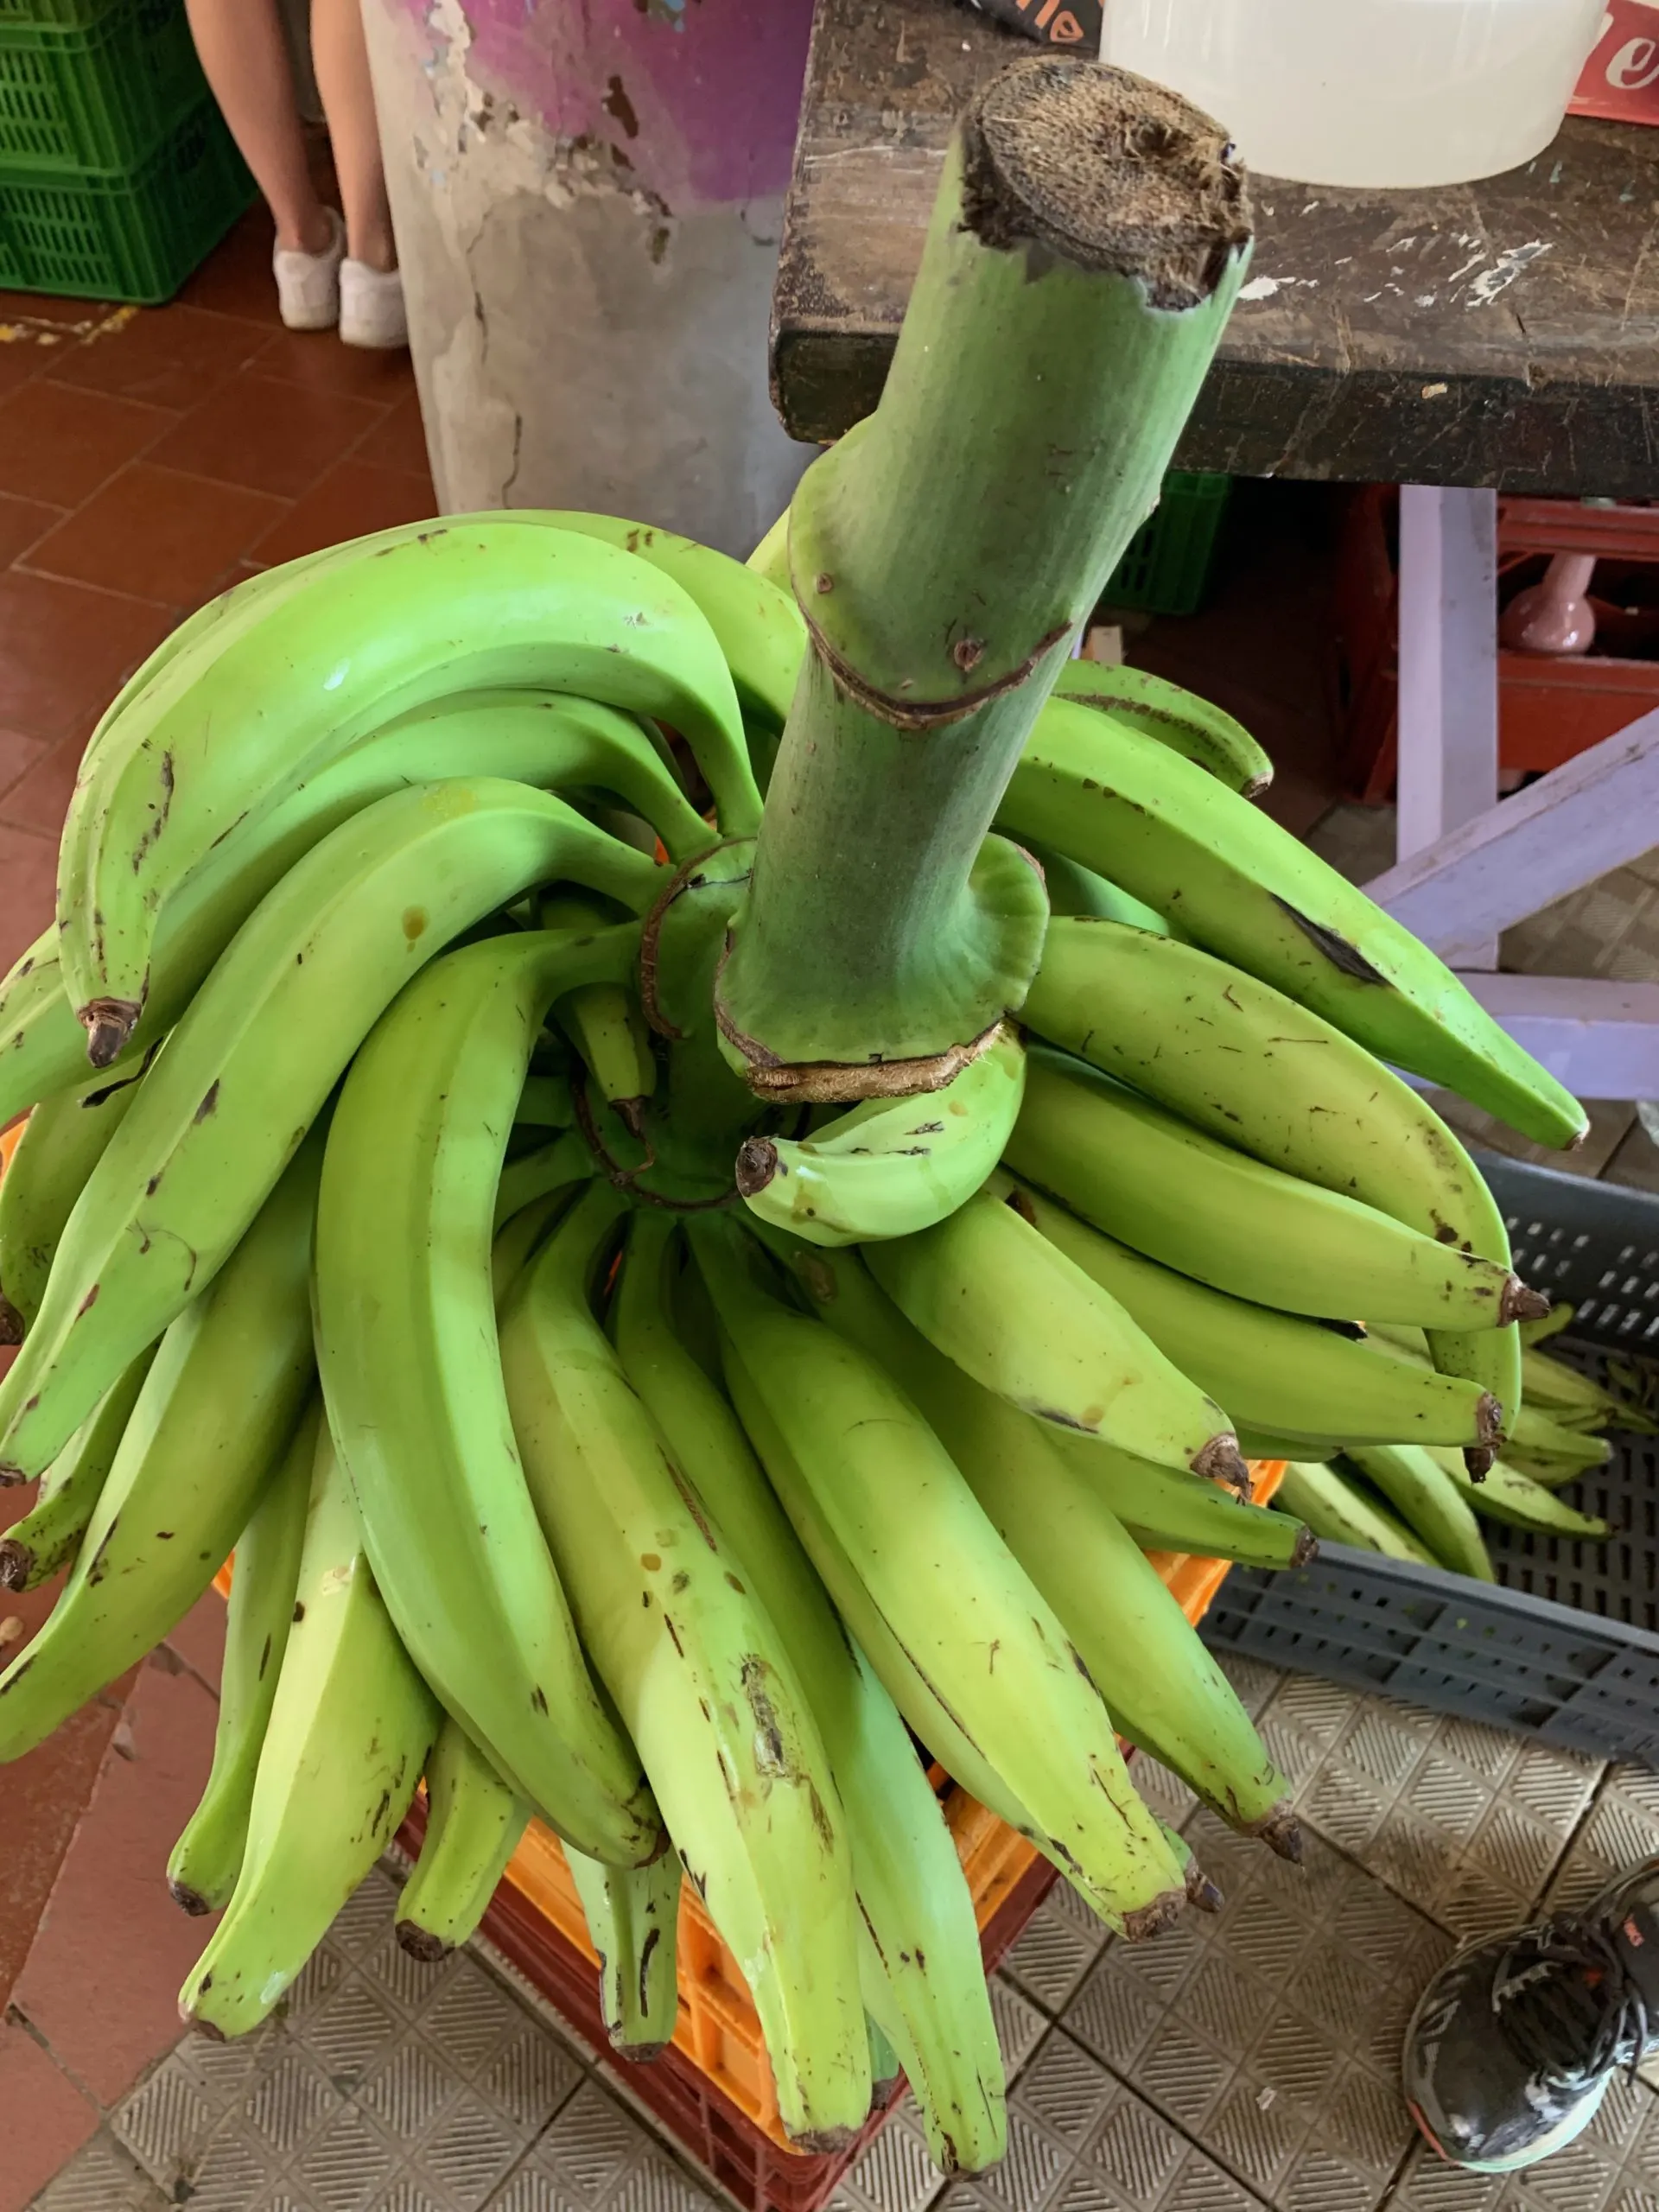 A huge limb of green bananas at the market in Sainte-Anne